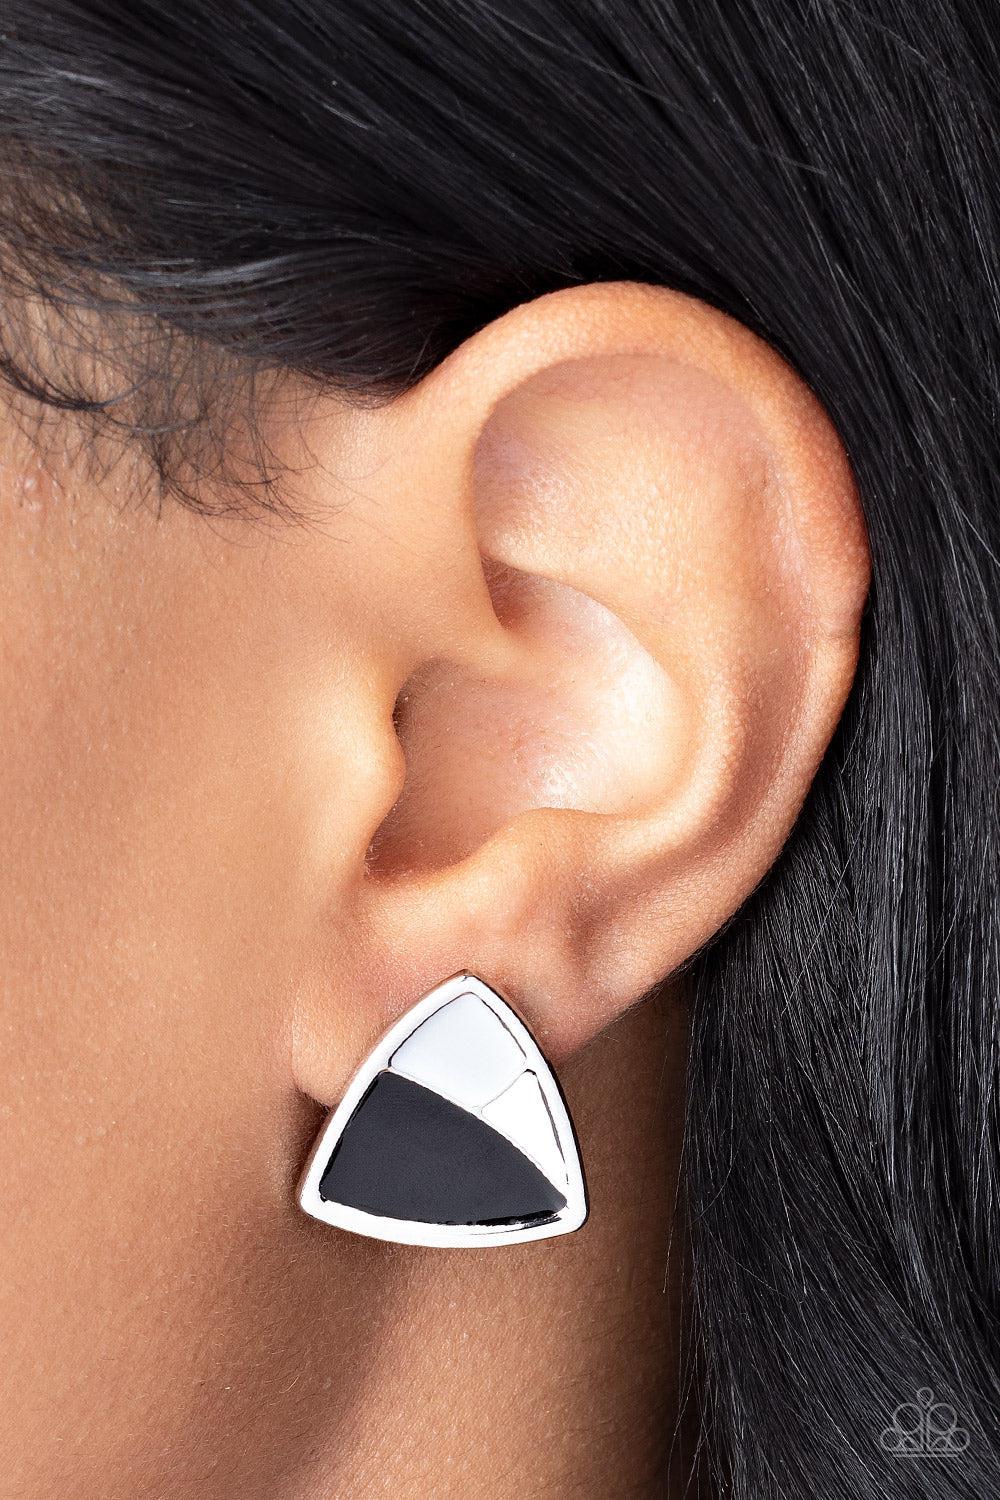 Kaleidoscopic Collision Black & White Earrings - Paparazzi Accessories- lightbox - CarasShop.com - $5 Jewelry by Cara Jewels